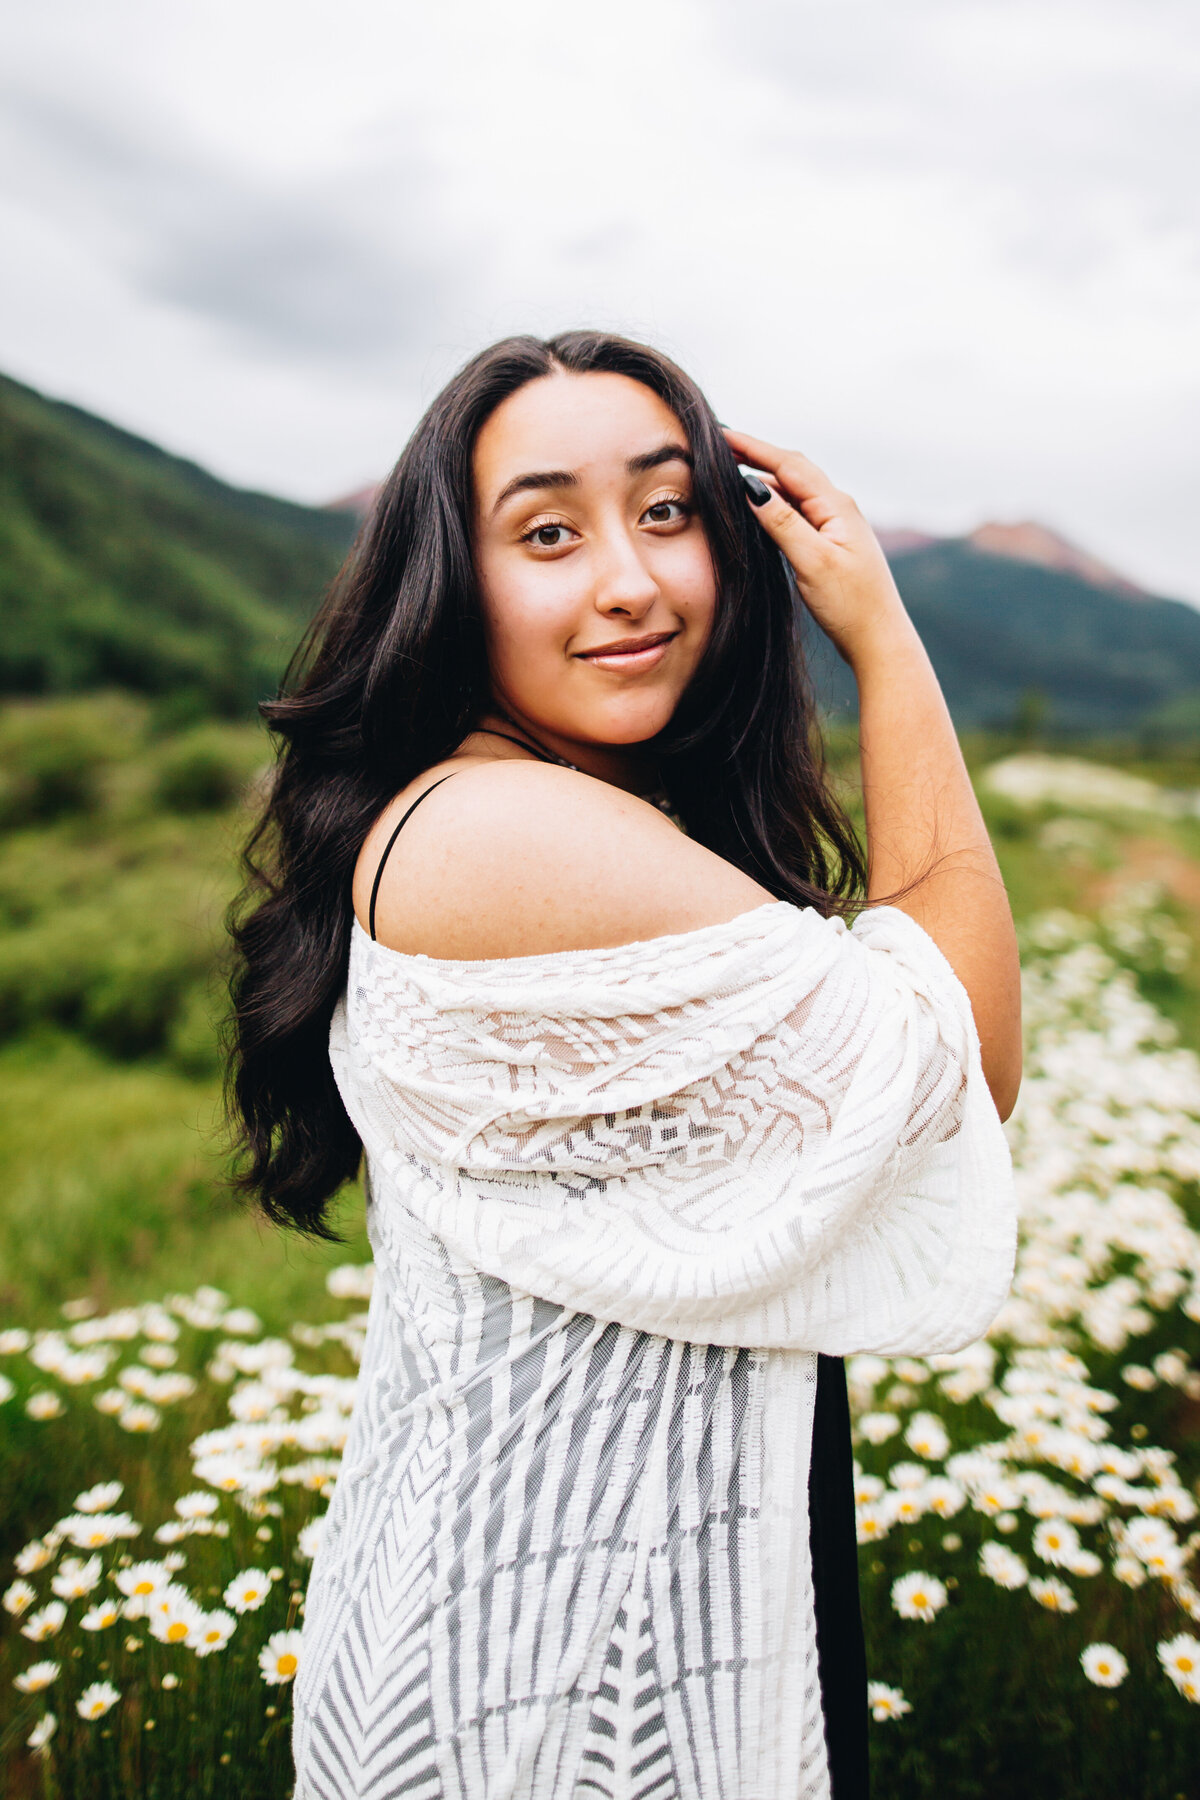 Melissa poses with wild daisies for her Telluride senior pictures.